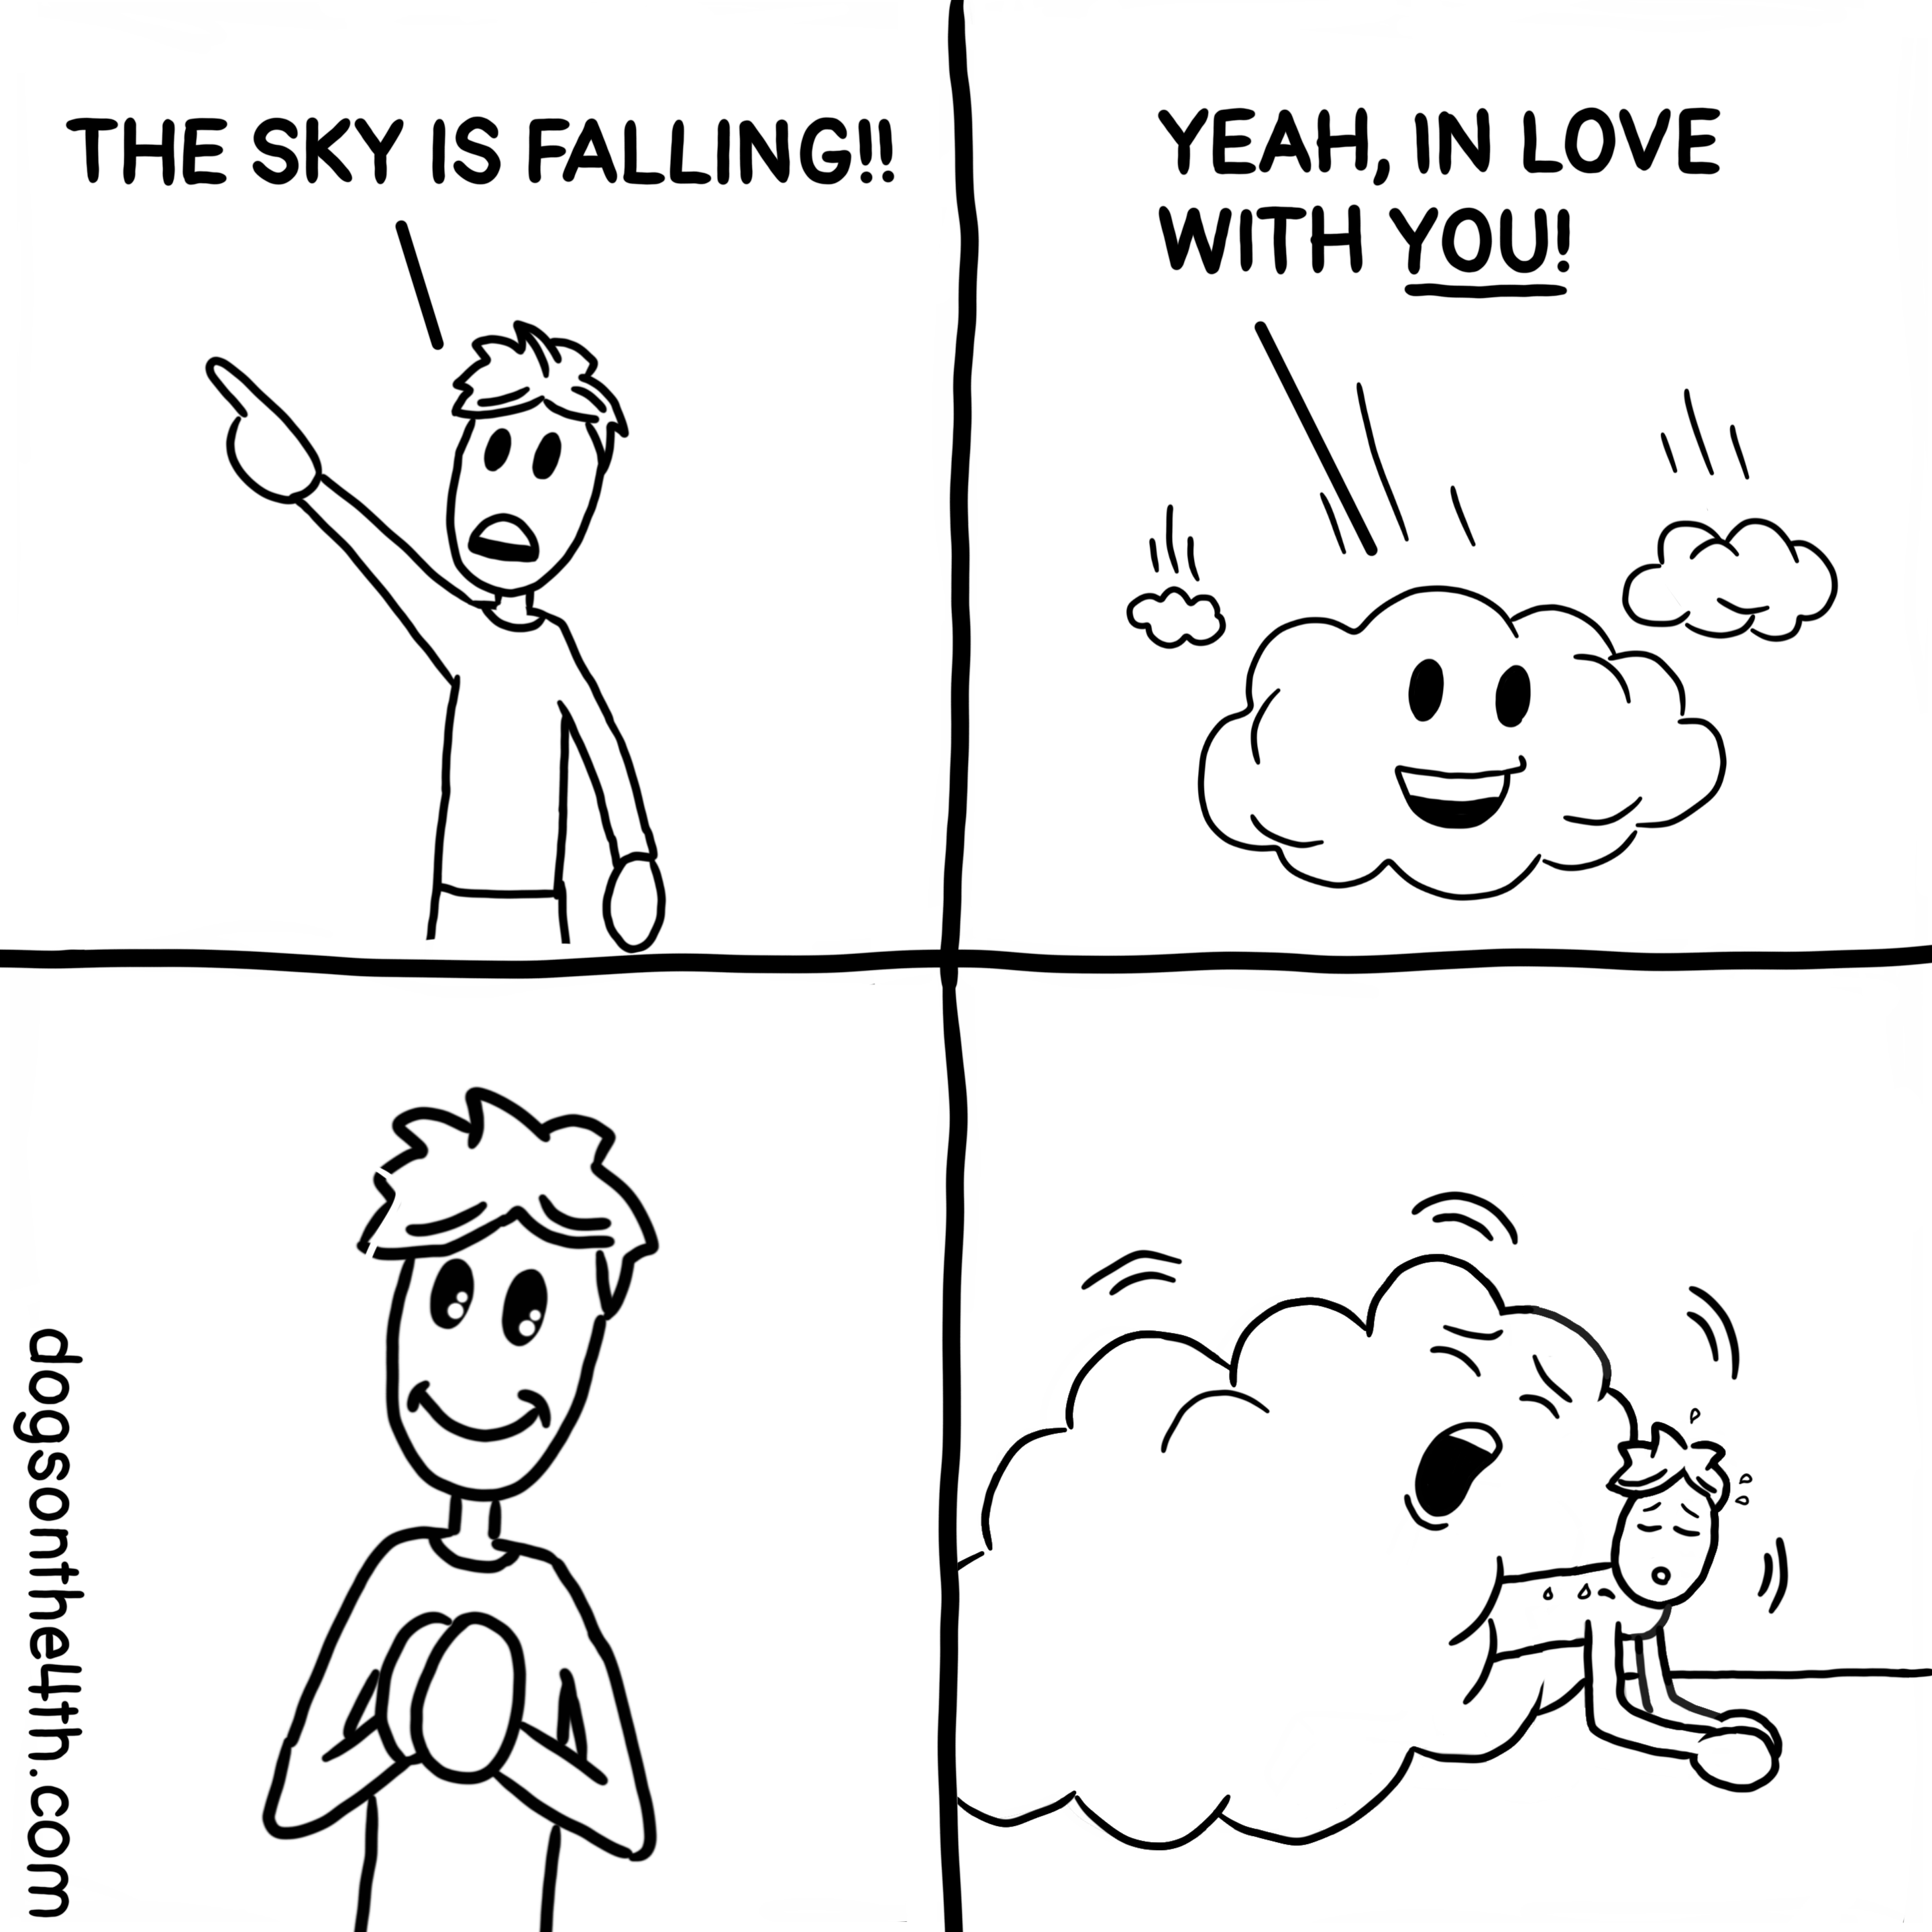 sky is falling in love with you - The Sky Is Falling!! Yeah, In Love With You! dogsonthe4th.com